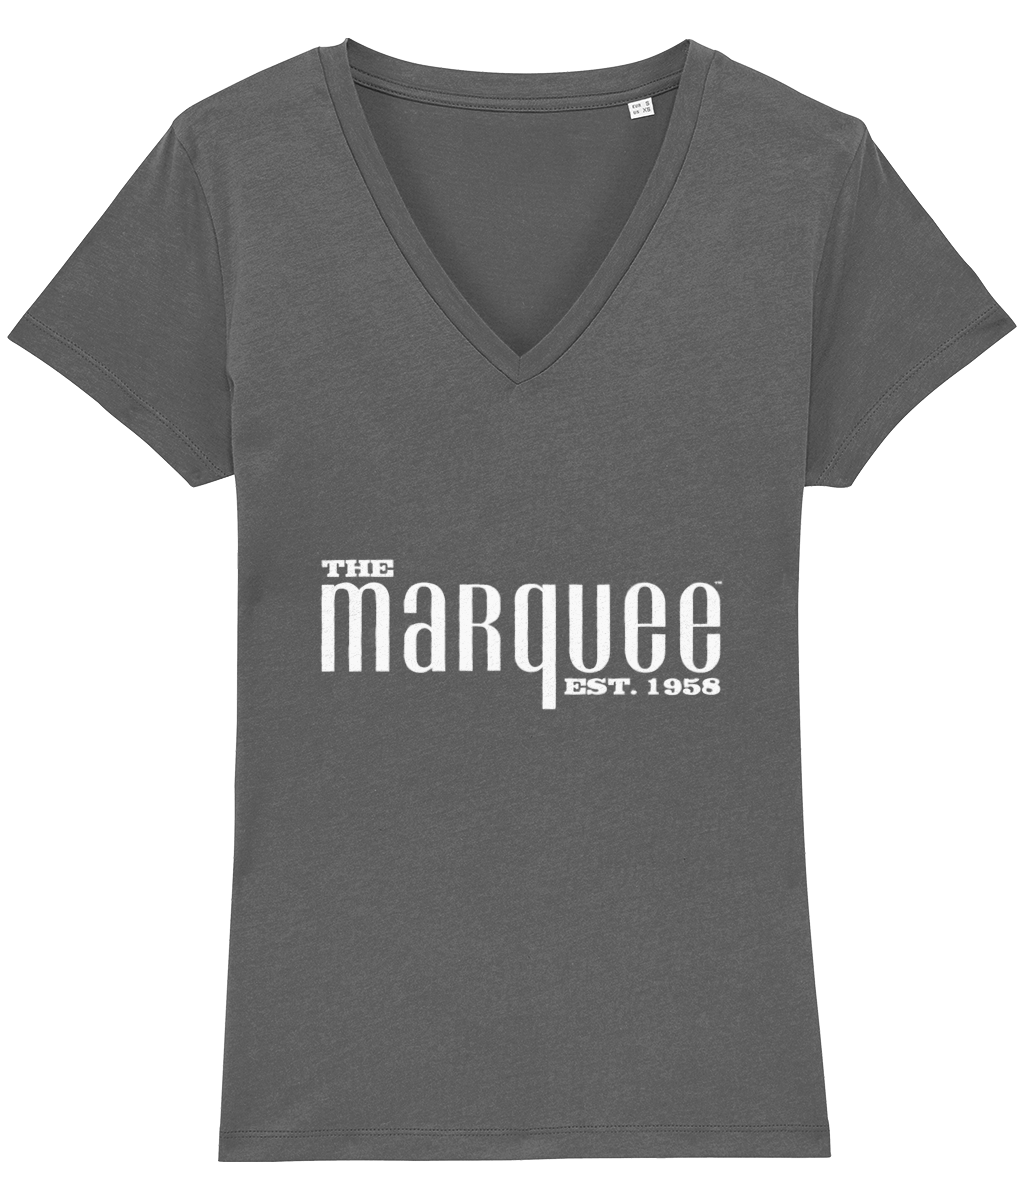 The Marquee Women's V-Neck T-Shirt